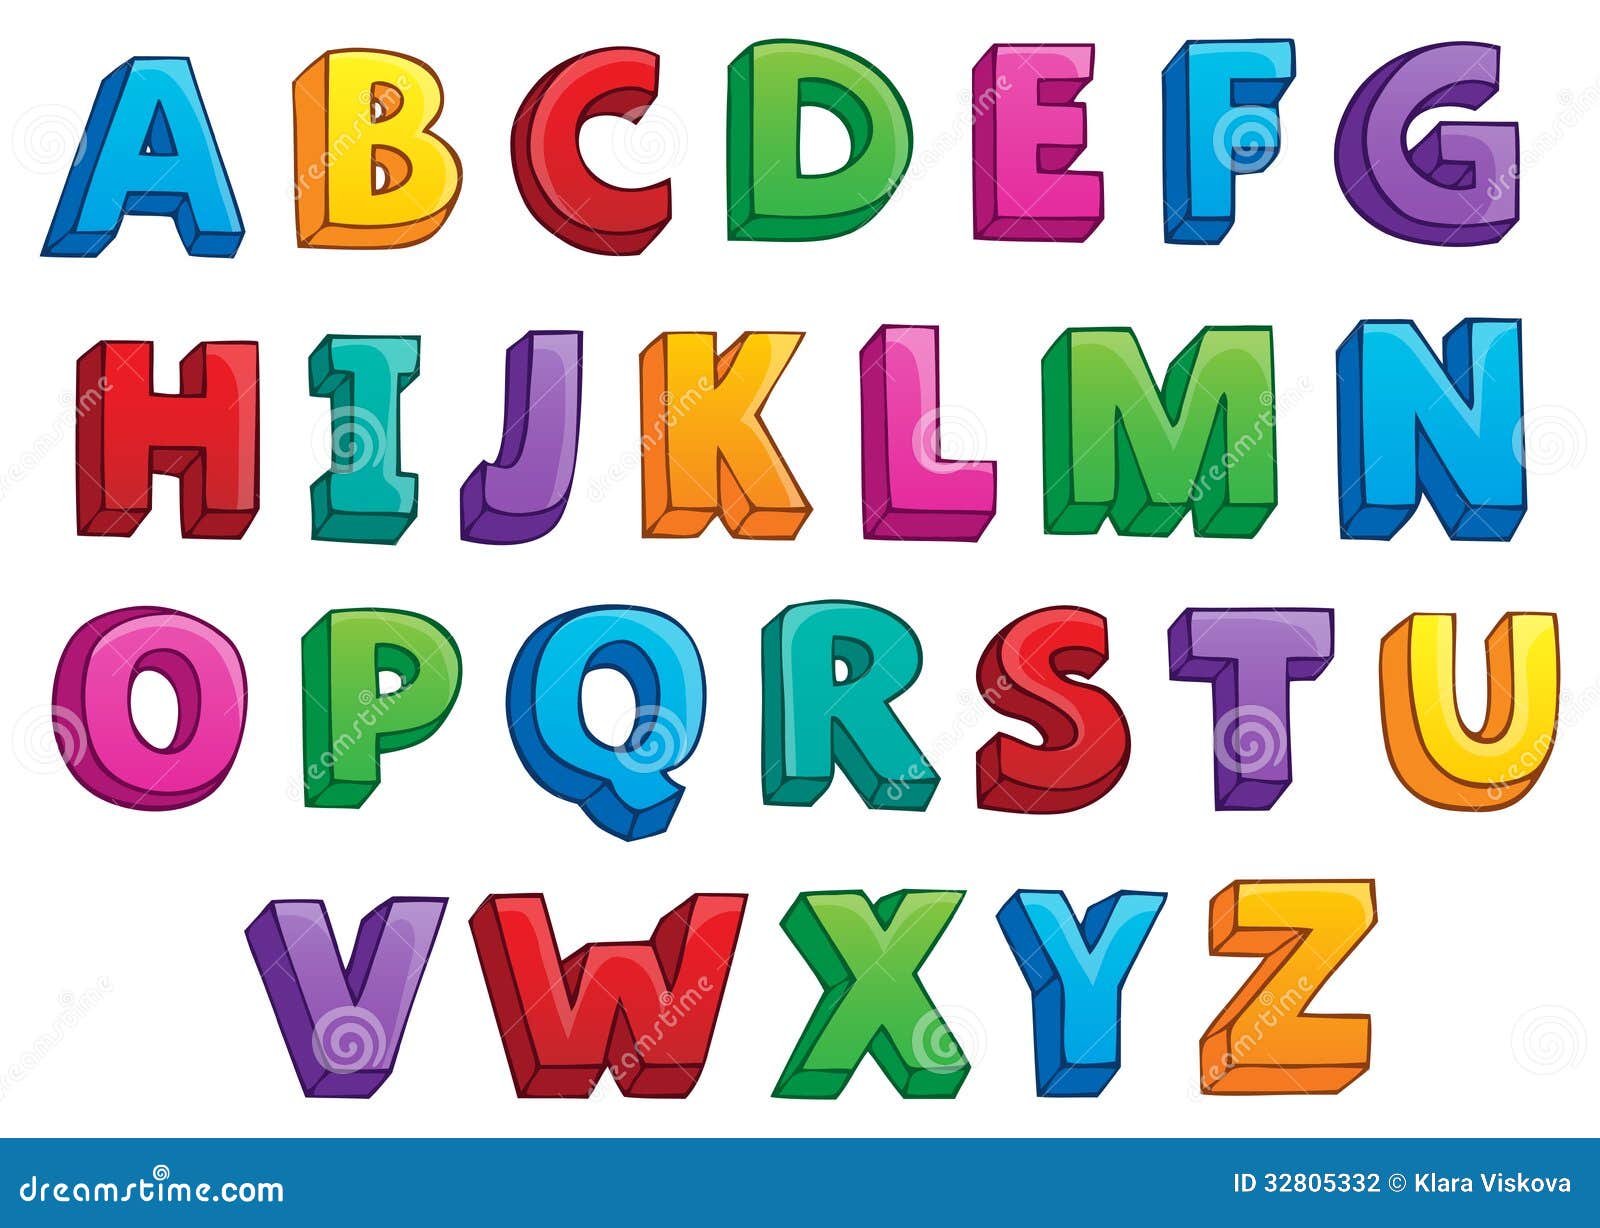 Image With Alphabet Theme 1 Stock Vector - Illustration of ...